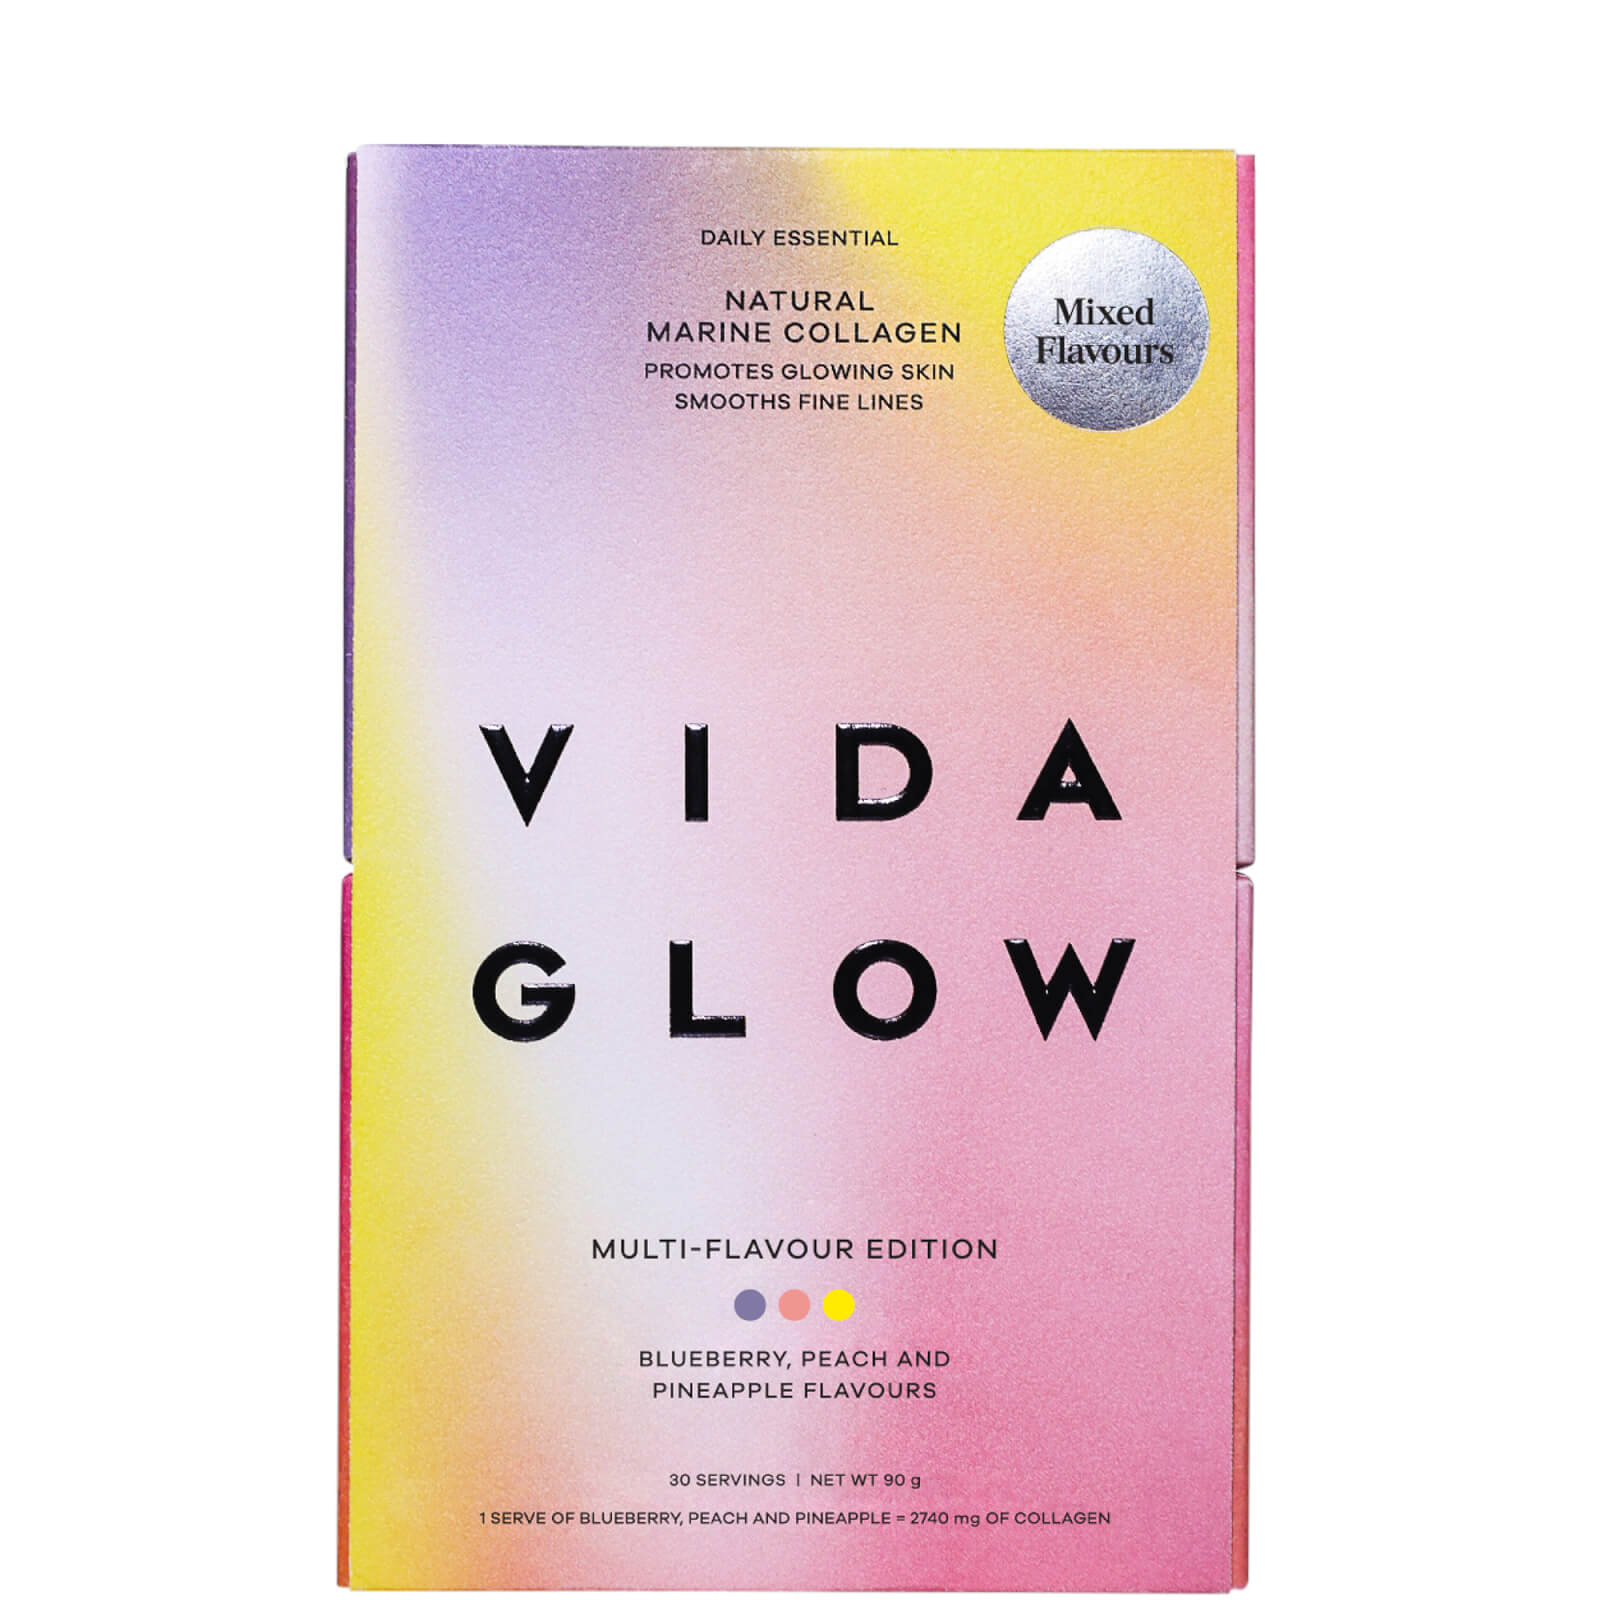 Vida Glow Holiday Mixed Flavour Edition Supplements (Worth £52.00)